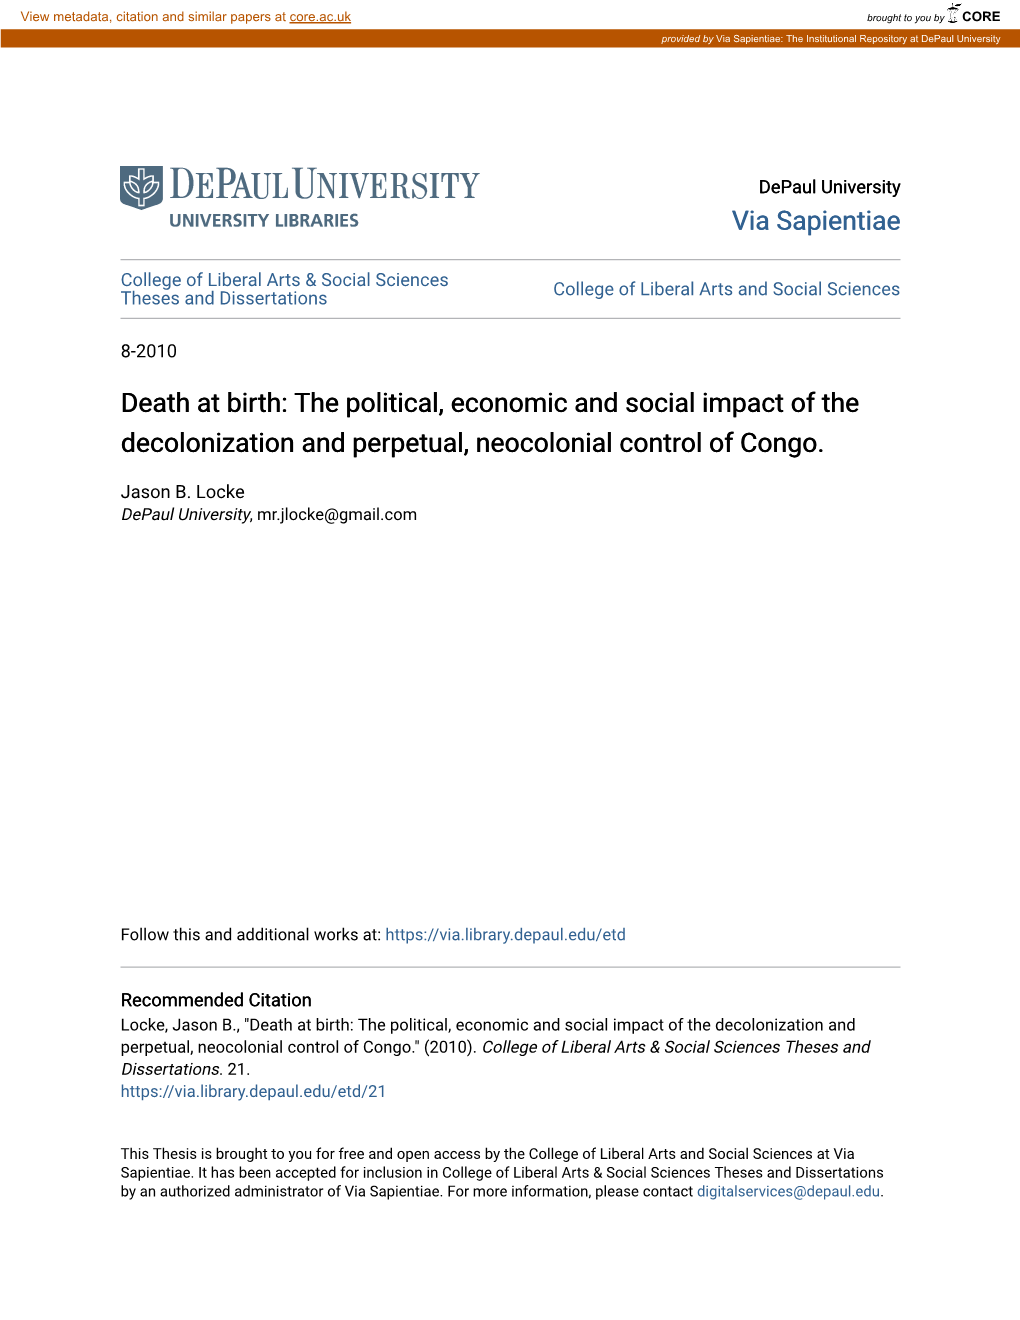 Death at Birth: the Political, Economic and Social Impact of the Decolonization and Perpetual, Neocolonial Control of Congo